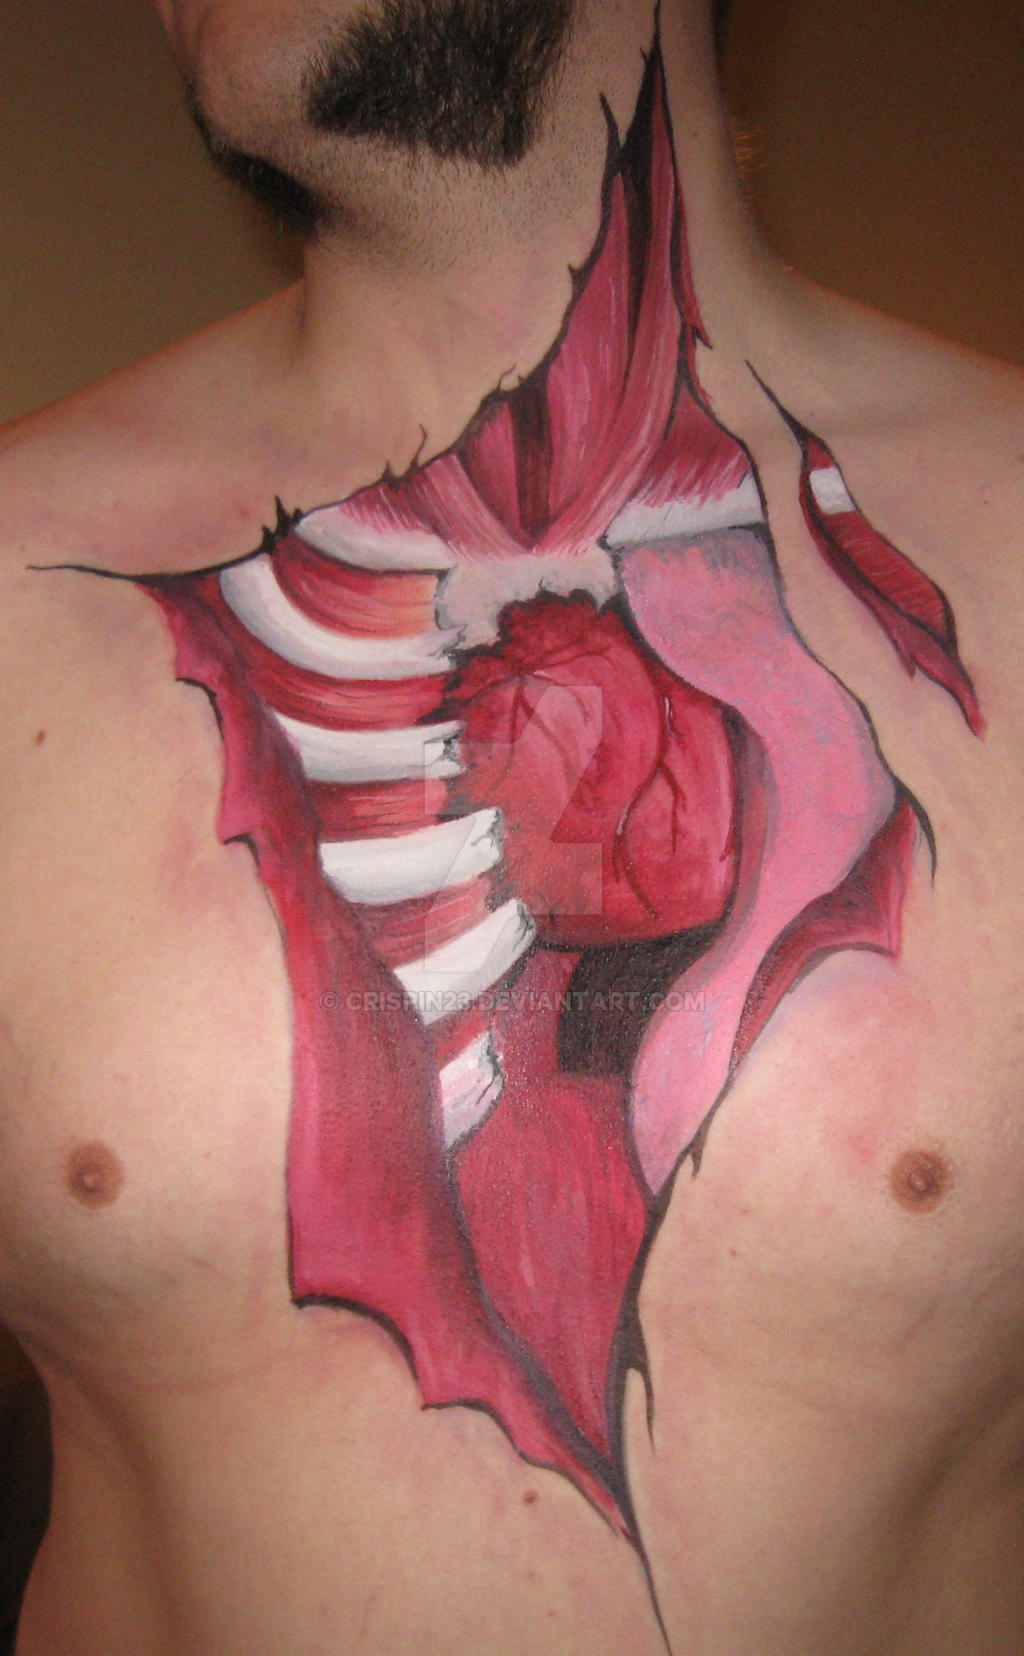 Ripped Open Chest by Crispin23 on DeviantArt